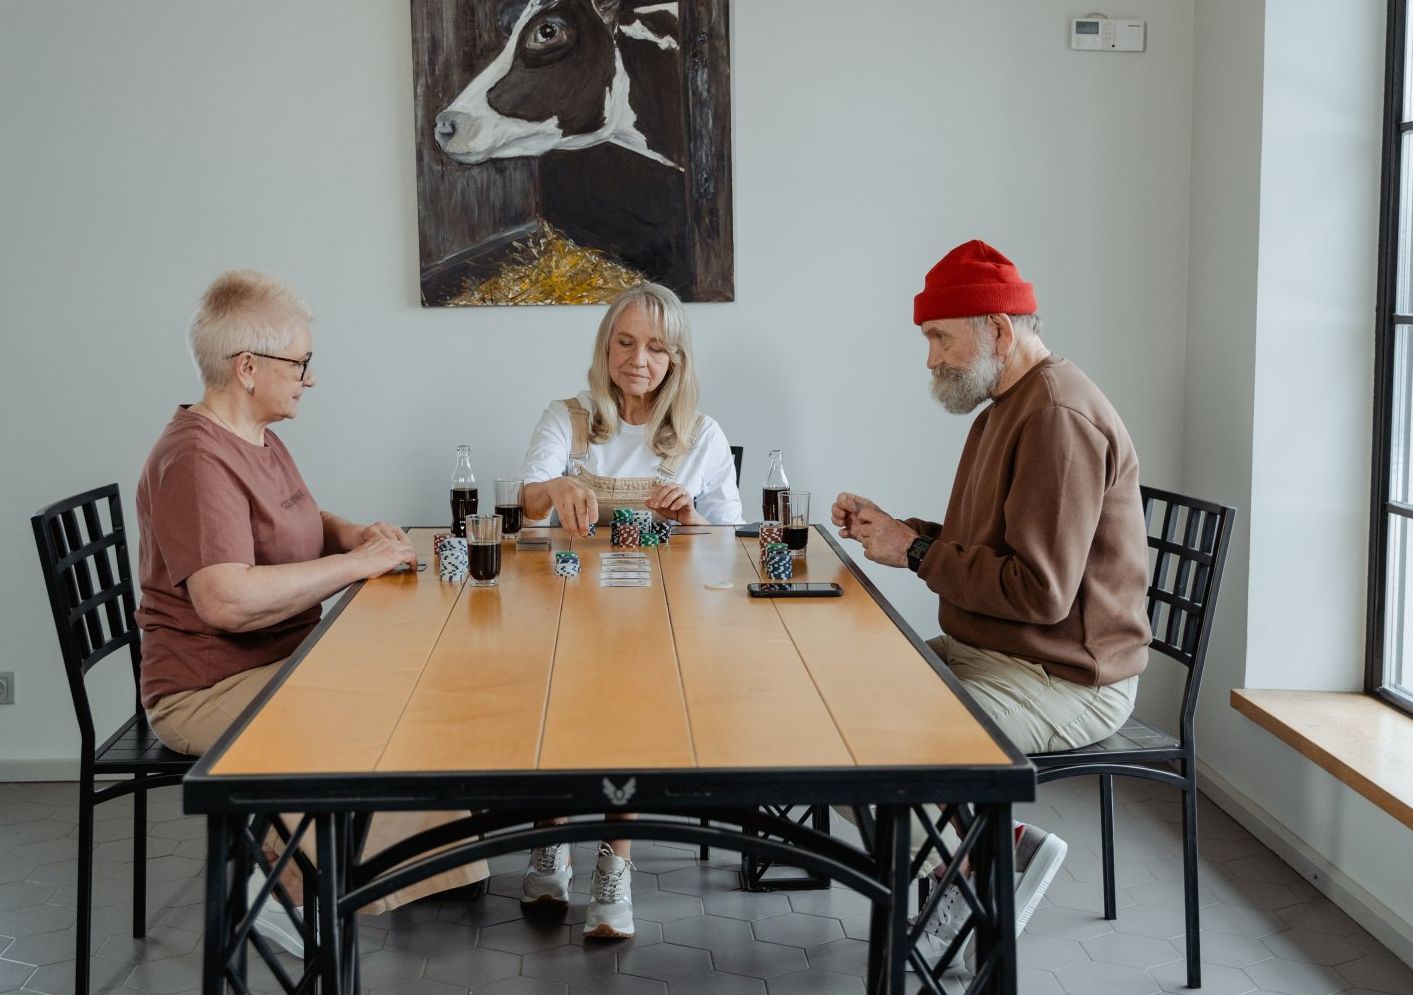 picture of 3 elderly people gathered around wooden table